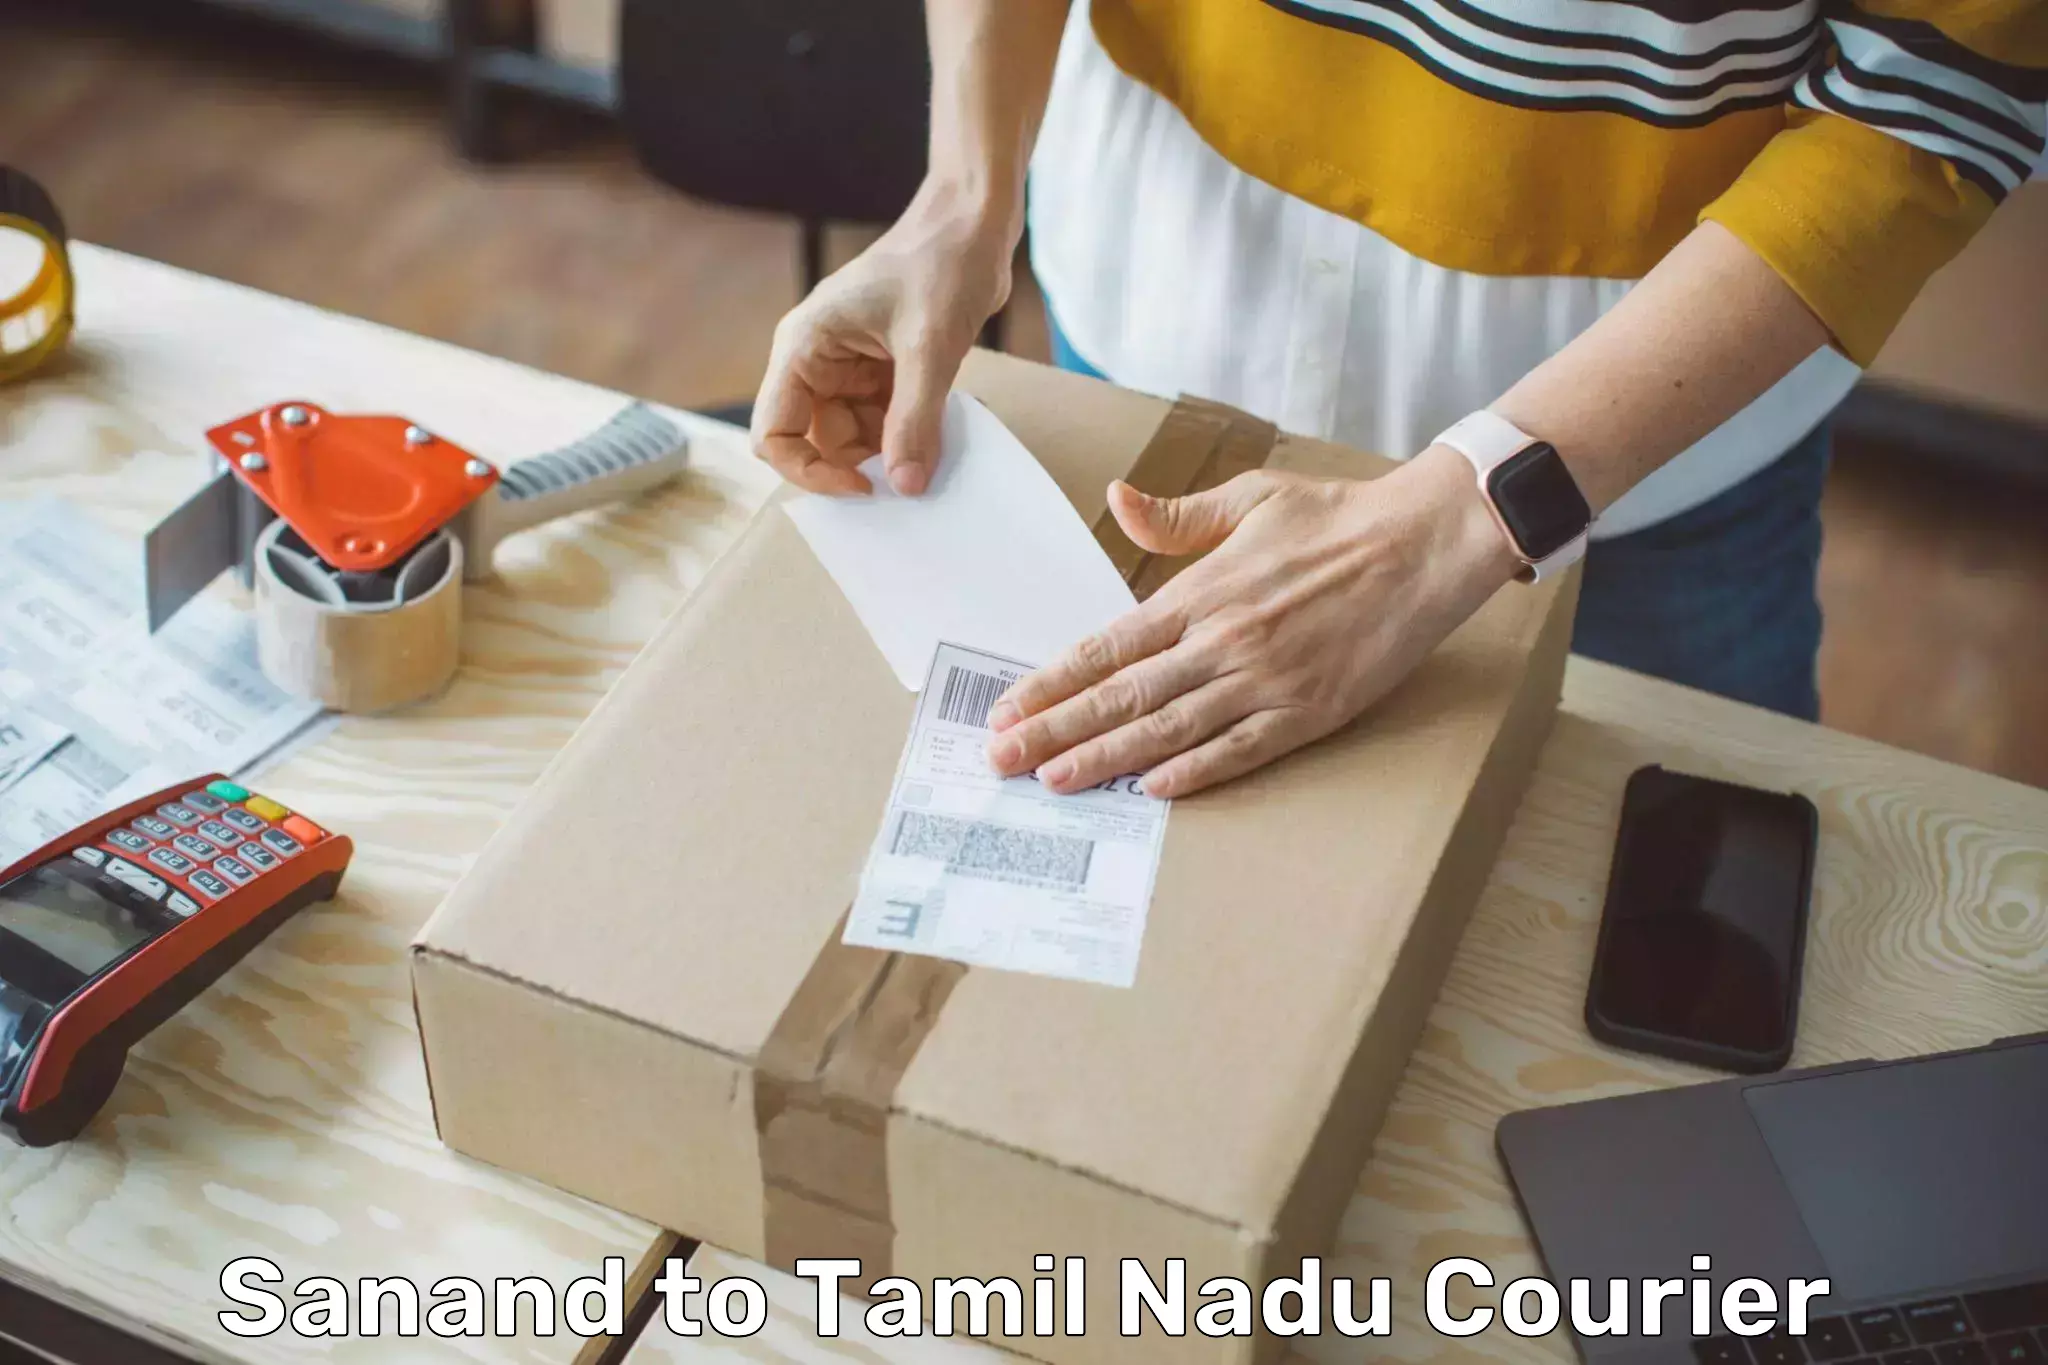 Optimized shipping services in Sanand to IIIT Tiruchirappalli